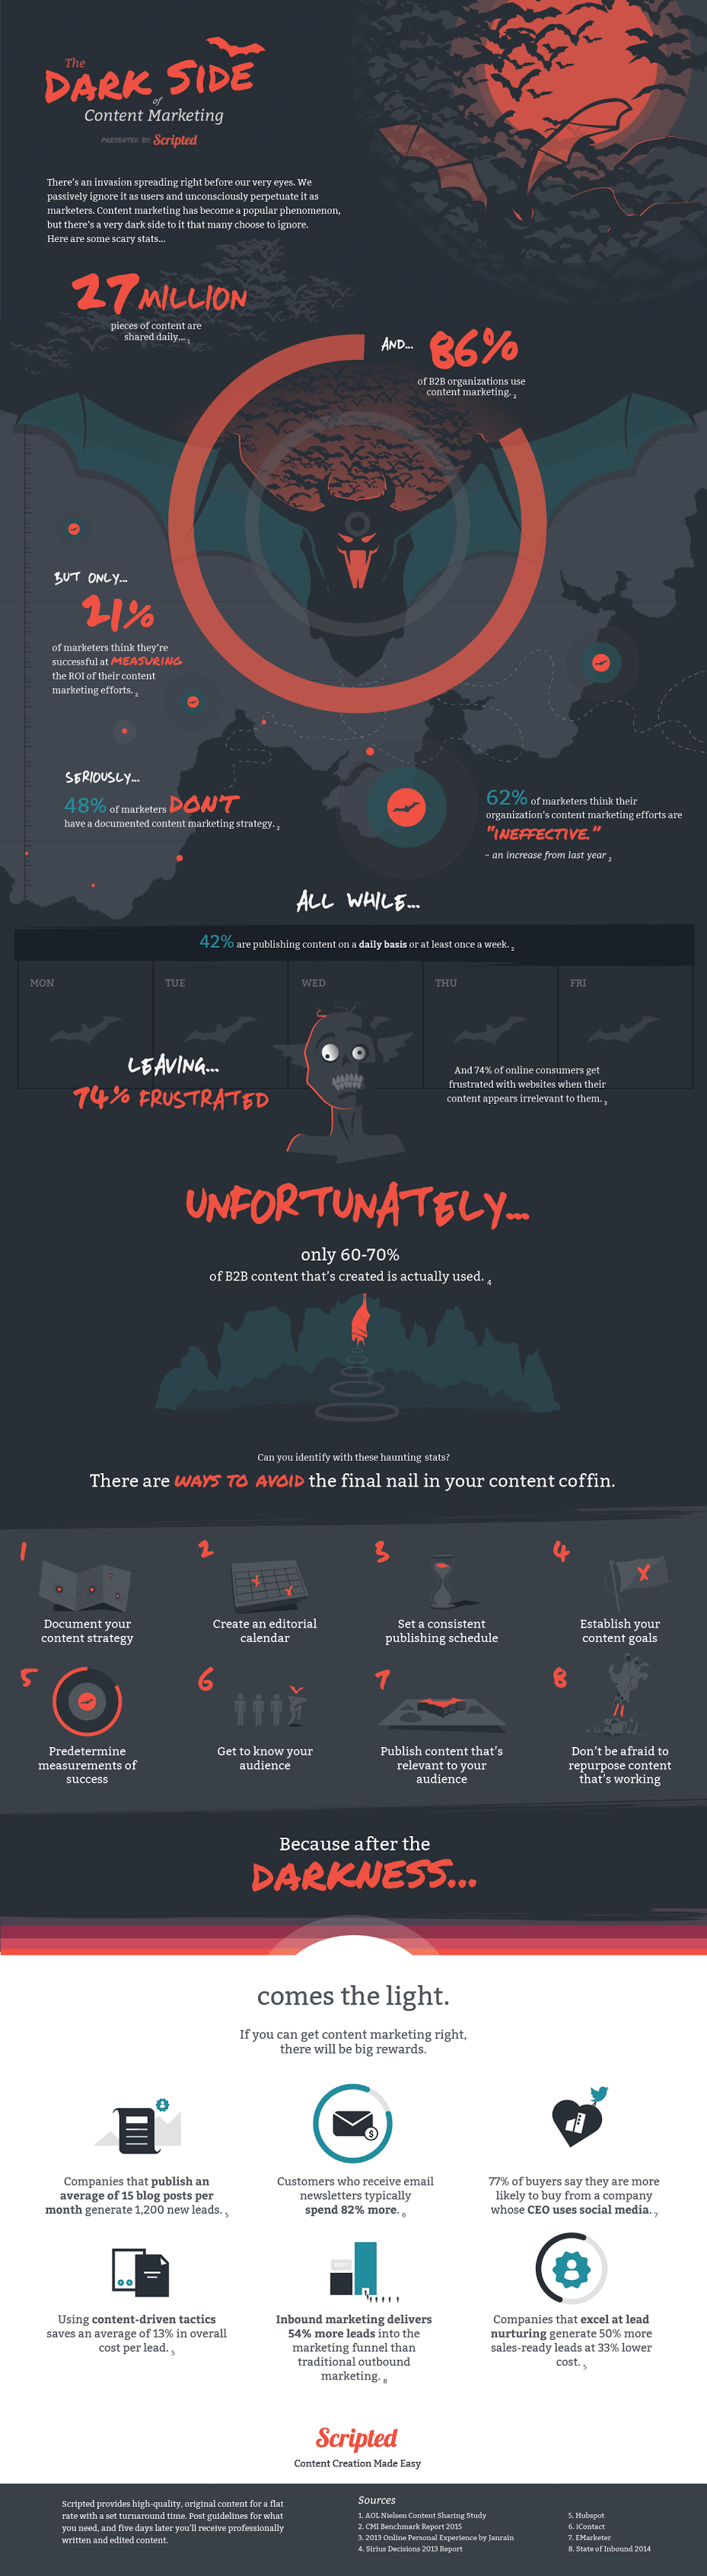 This infographic, looks at the especial part of content marketing that marketers are often hesitant to talk about: the dark side.